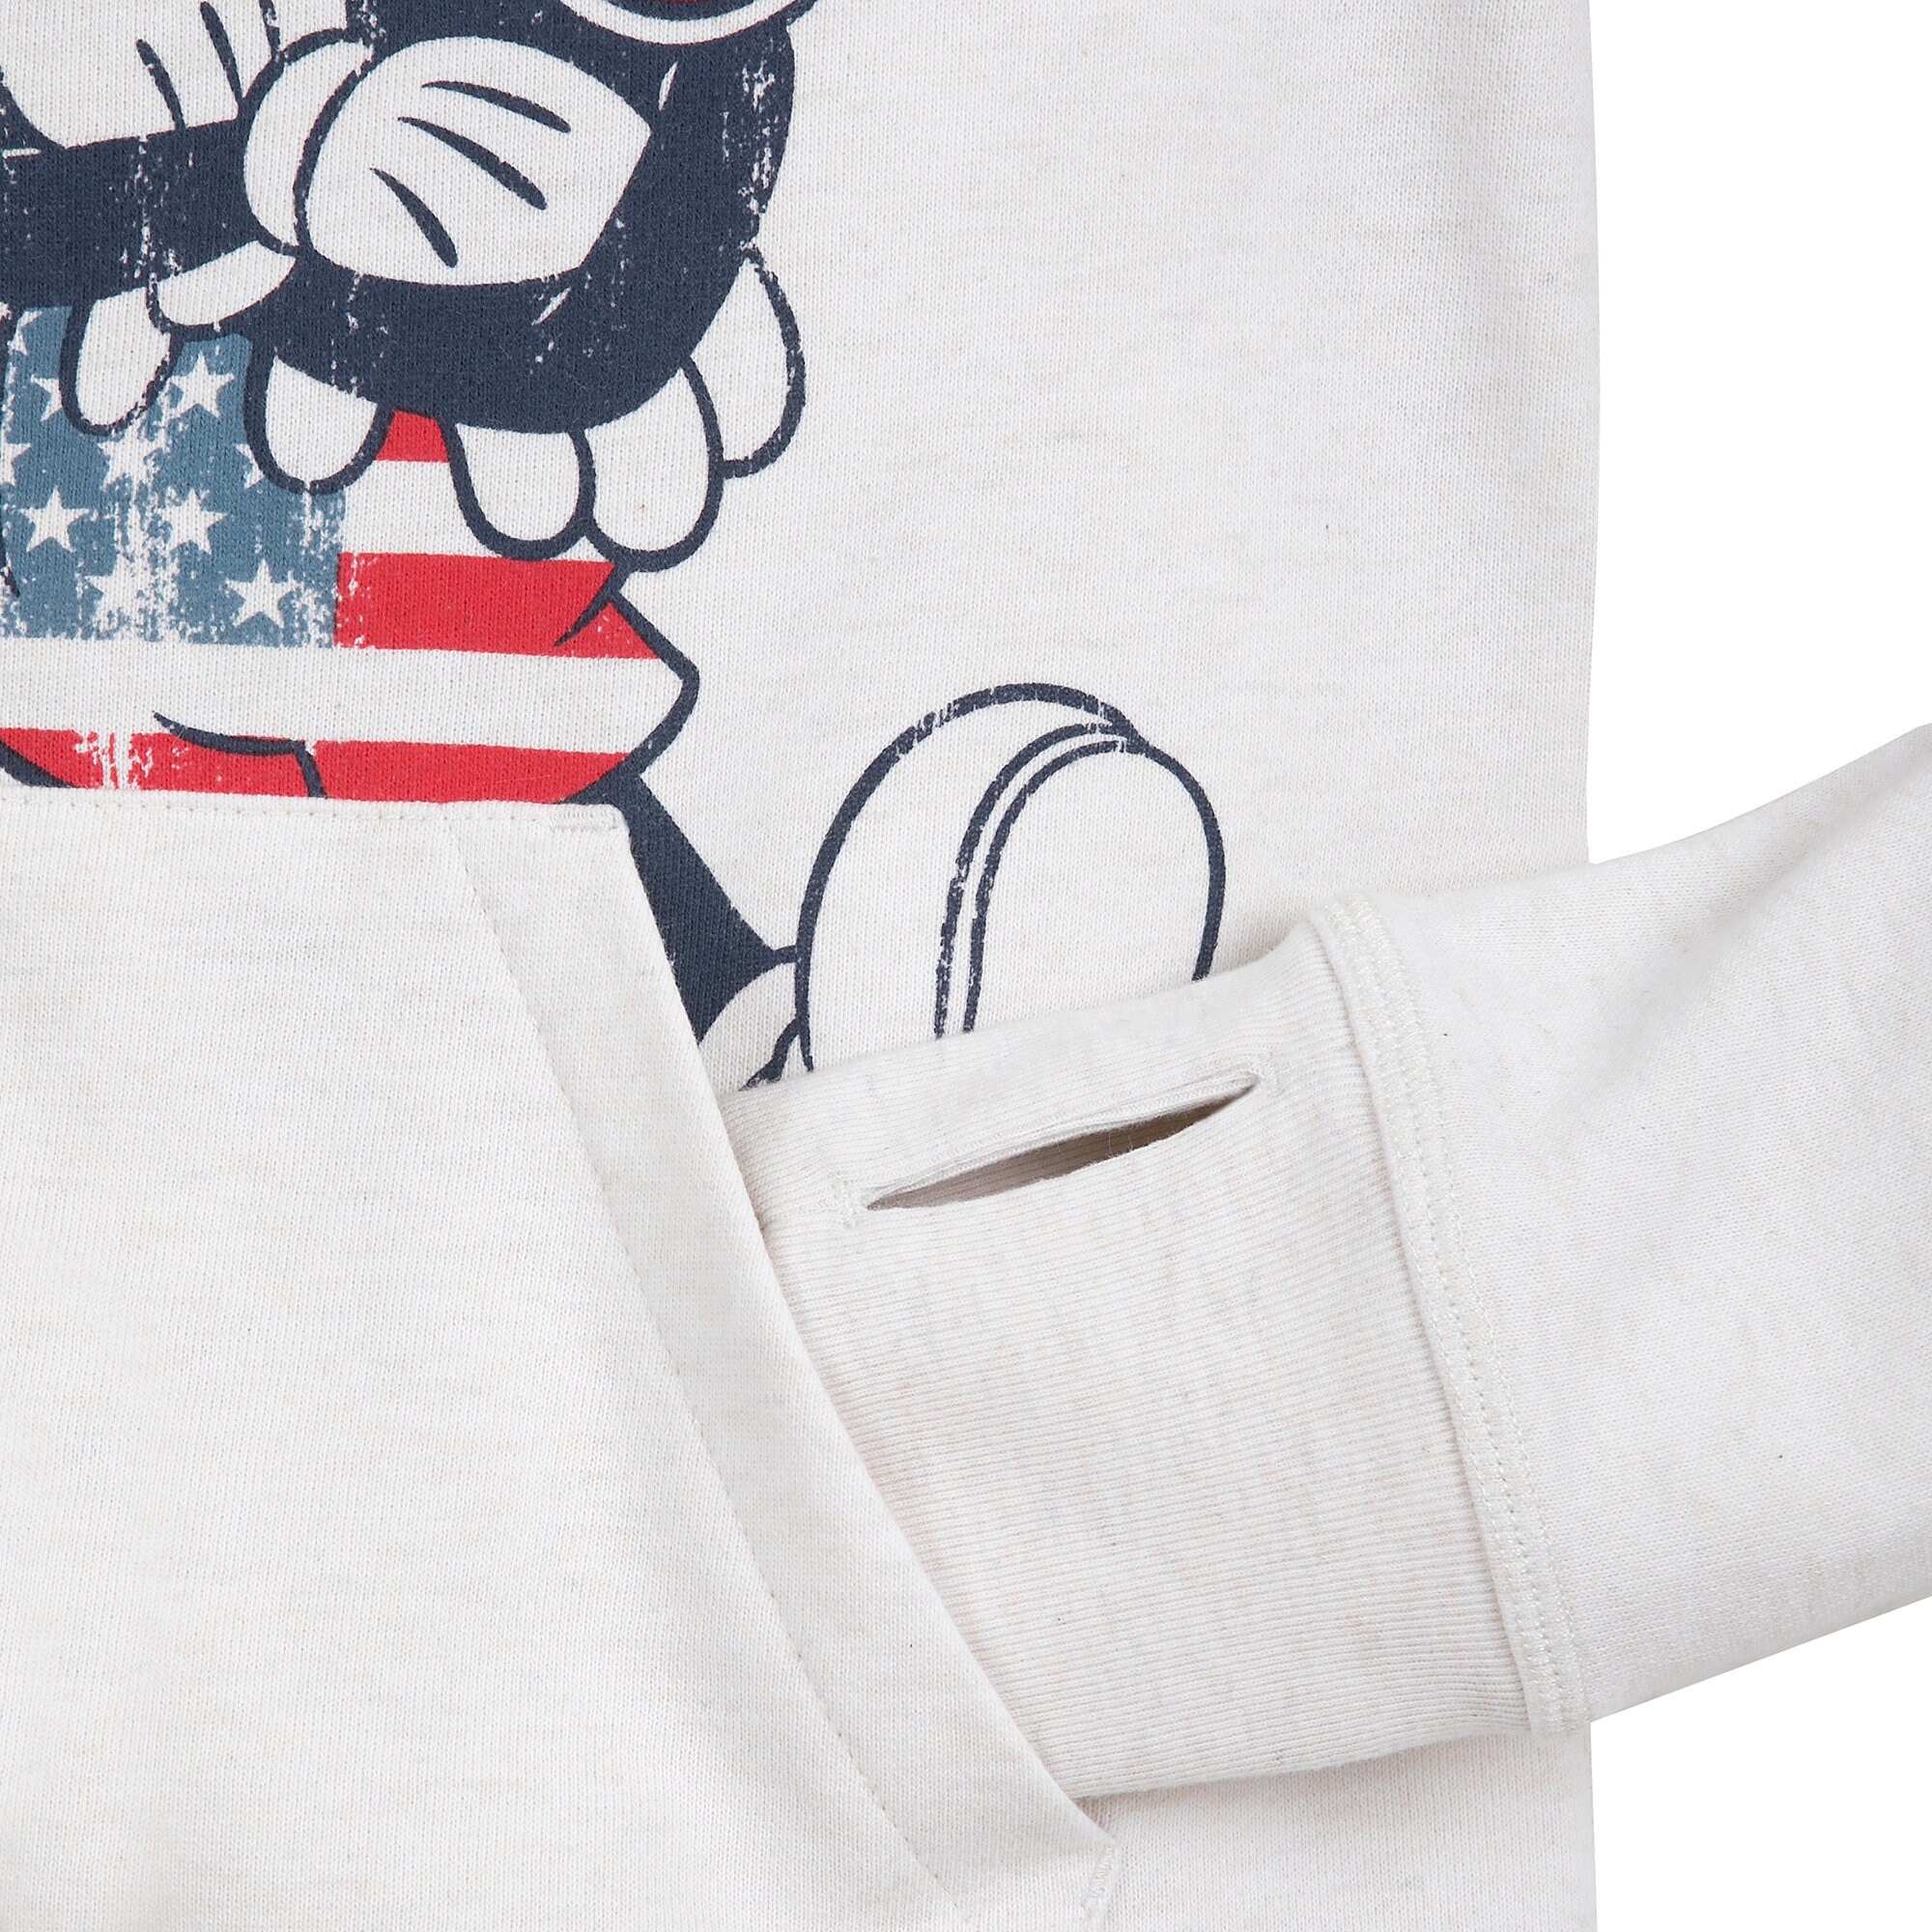 Mickey Mouse Americana Zip Hoodie for Women